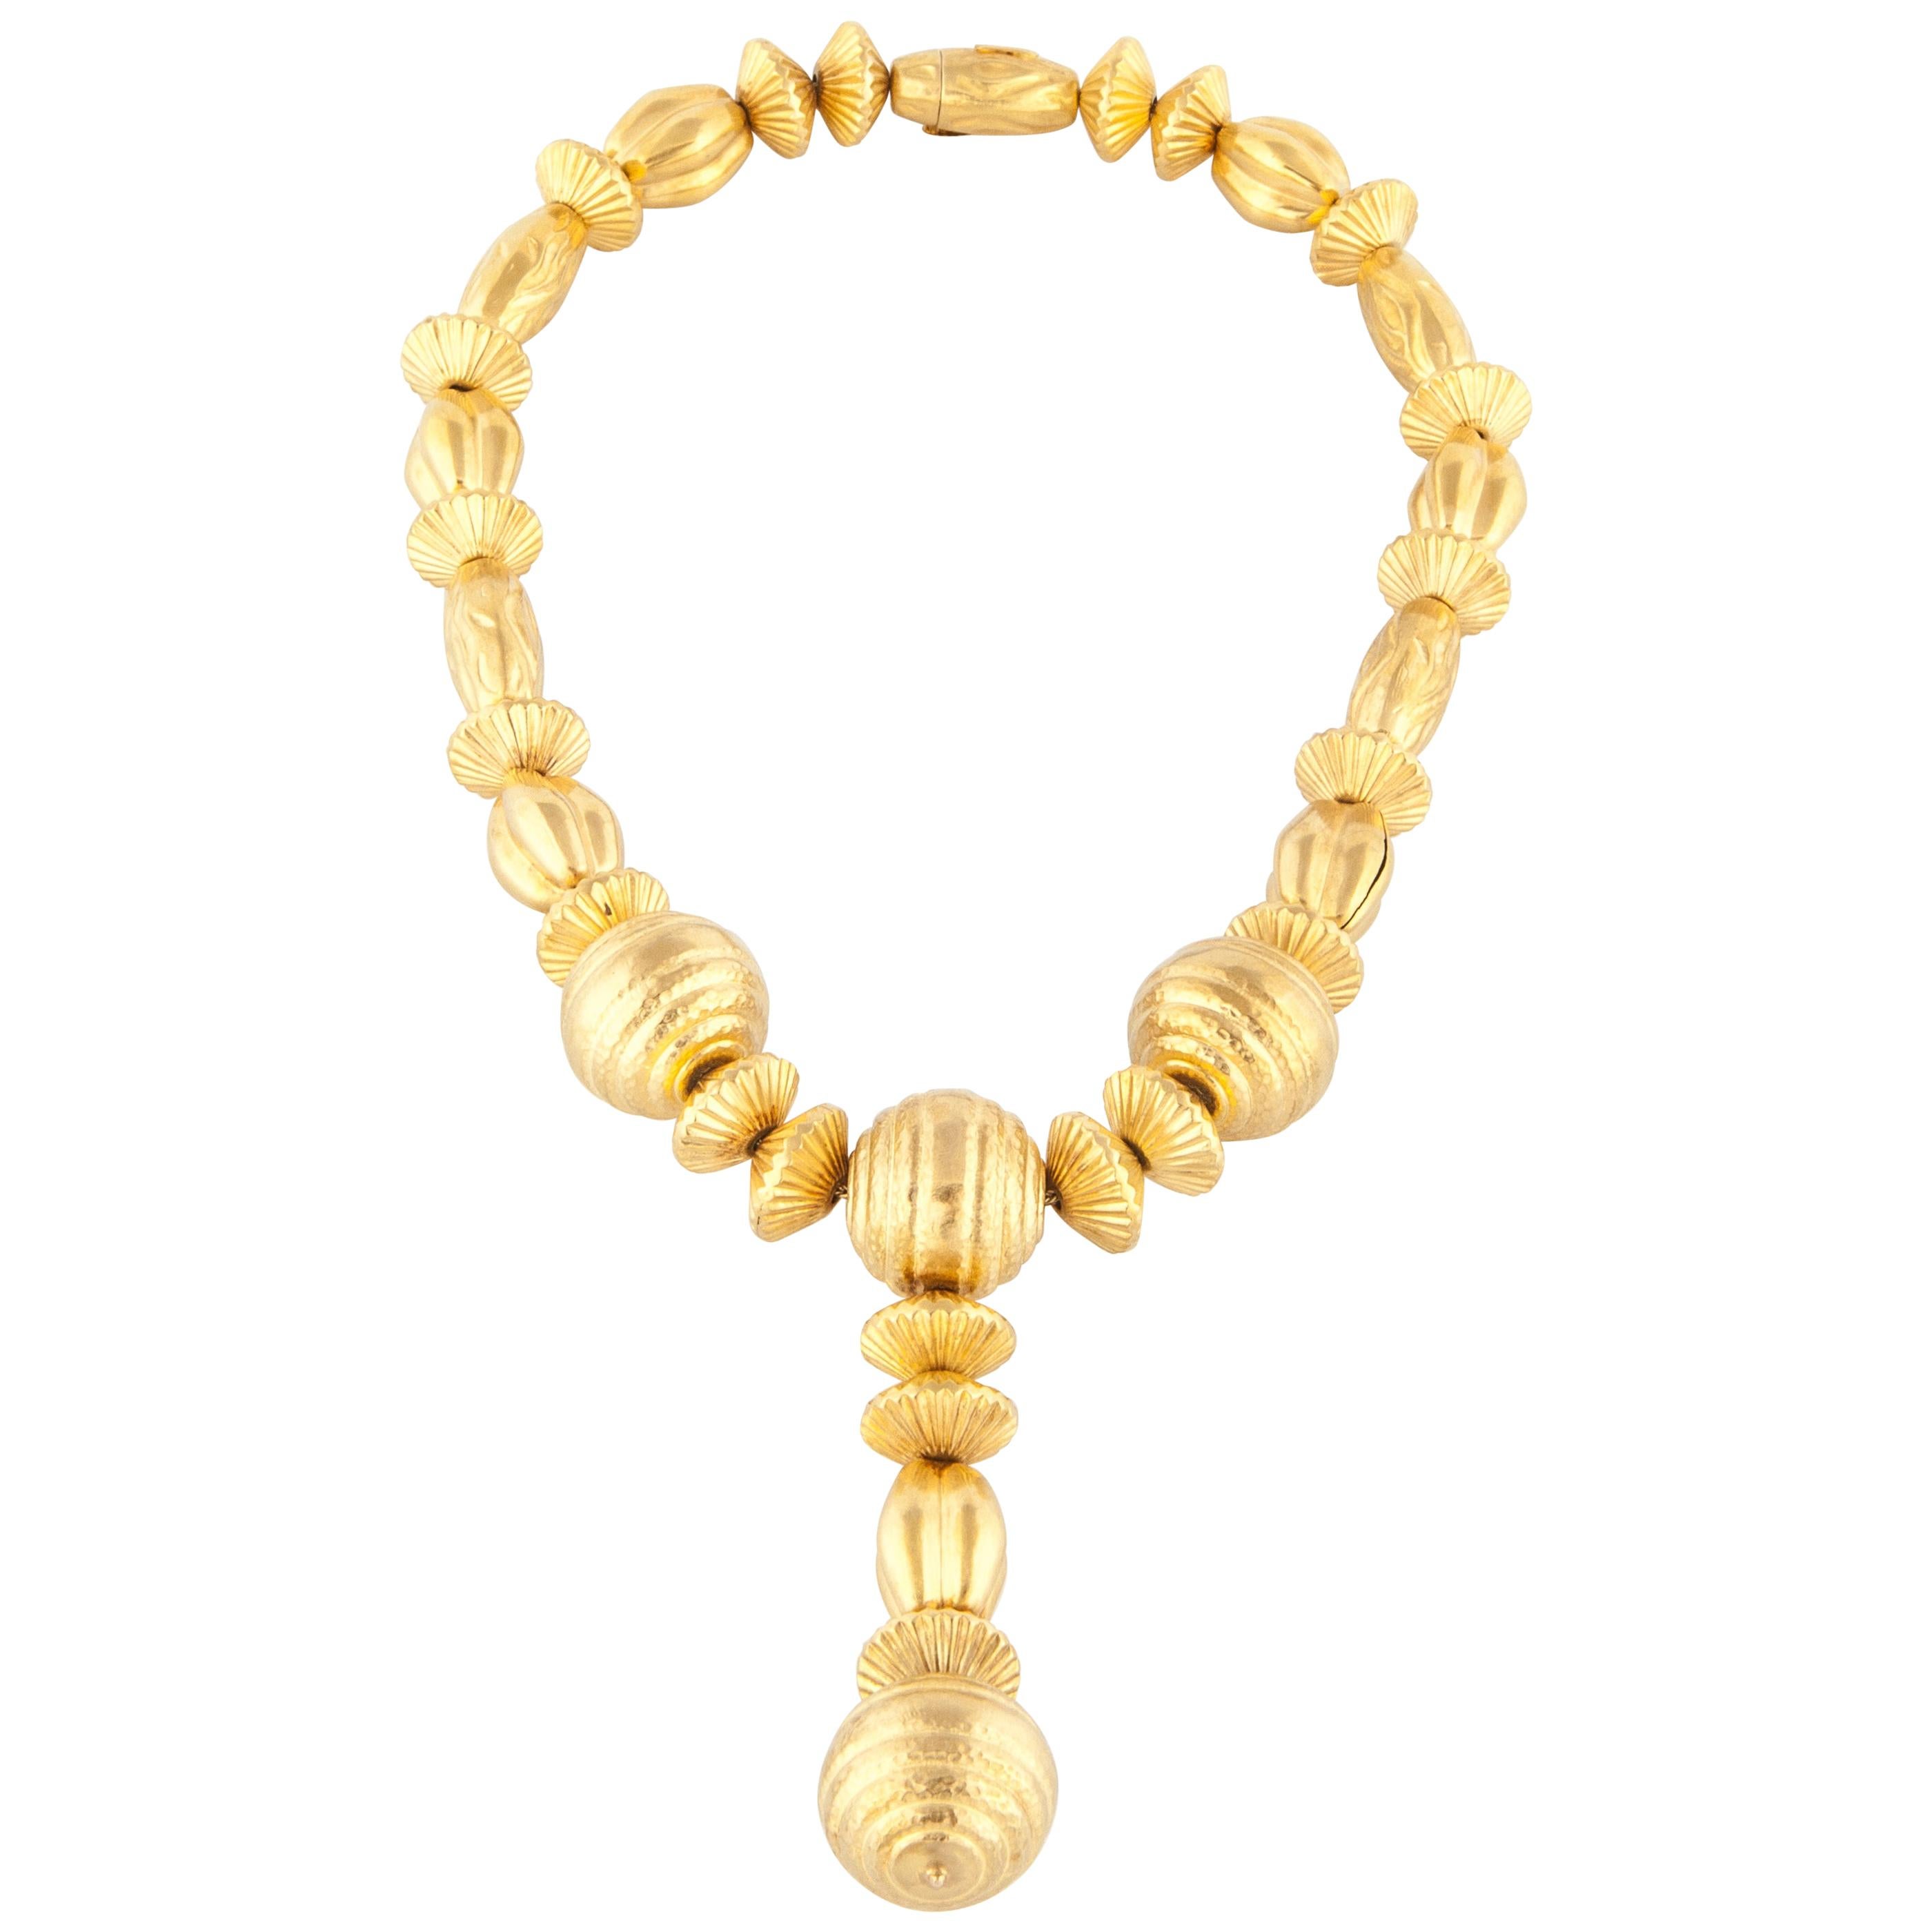 Lalaounis Bead Necklace in 18K Yellow Gold